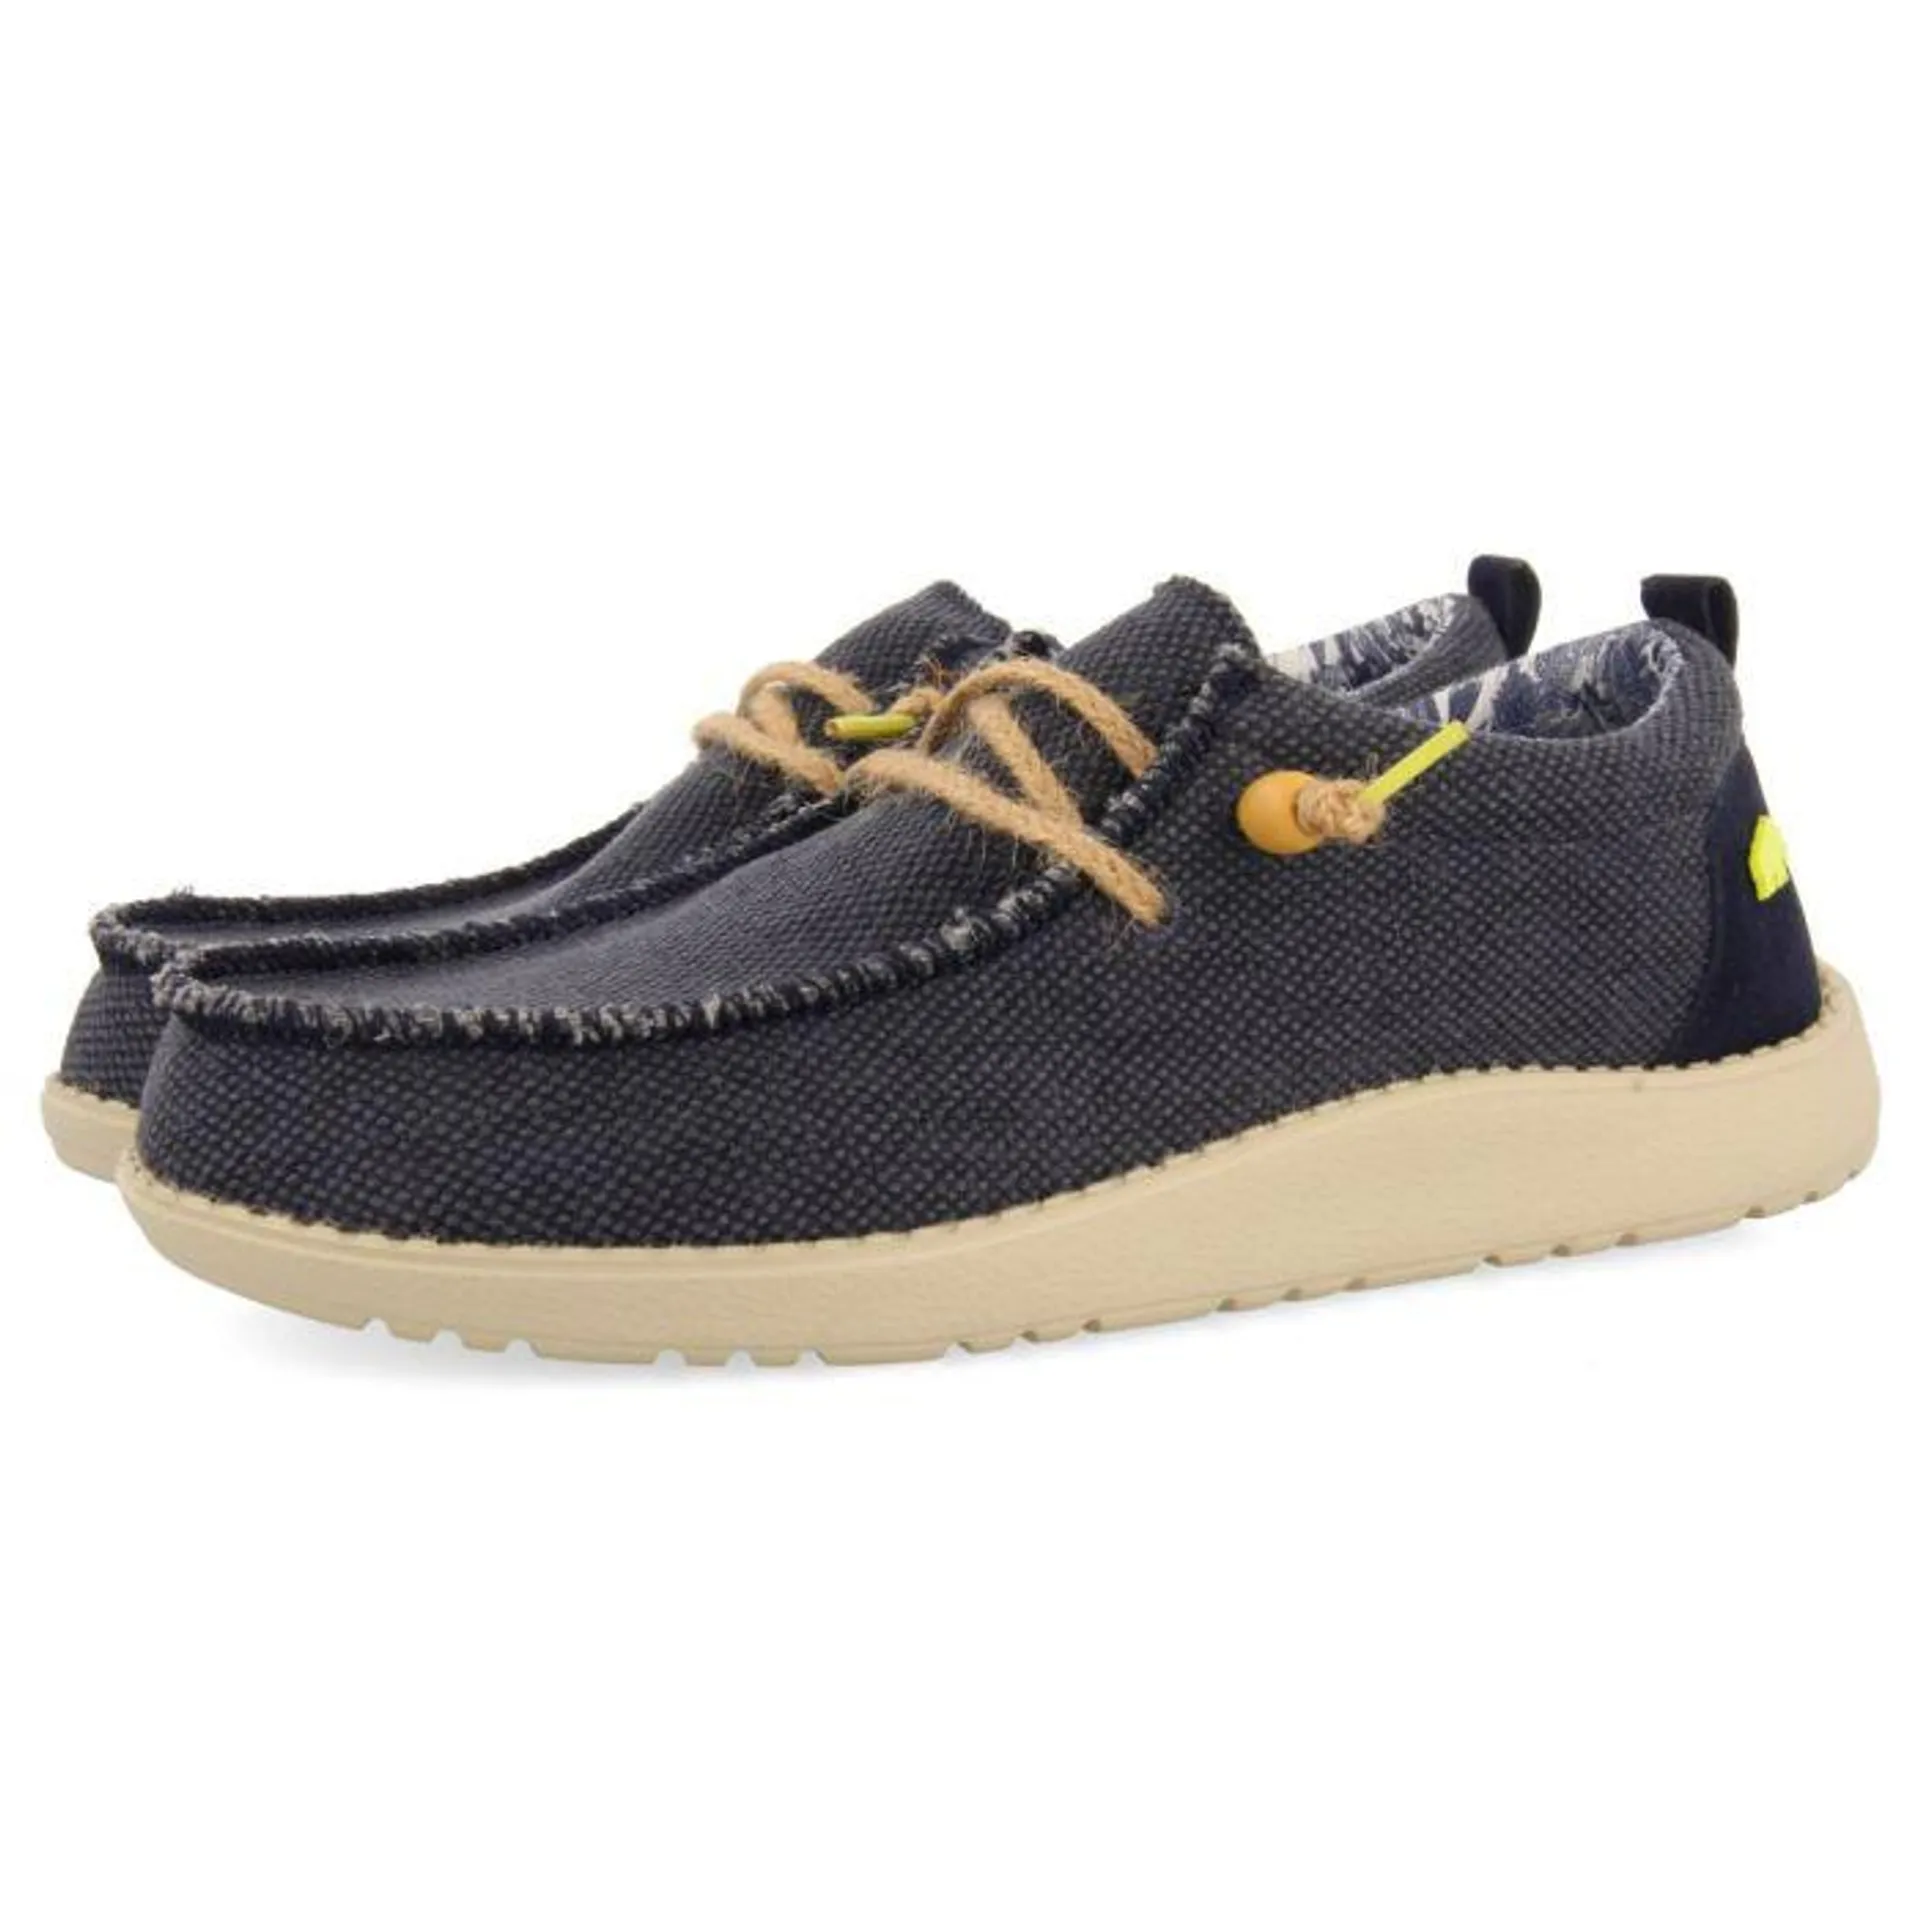 NAVY BLUE WALLABEES STYLE CANVAS AND JUTE LOAFERS FOR MEN VERNONIA